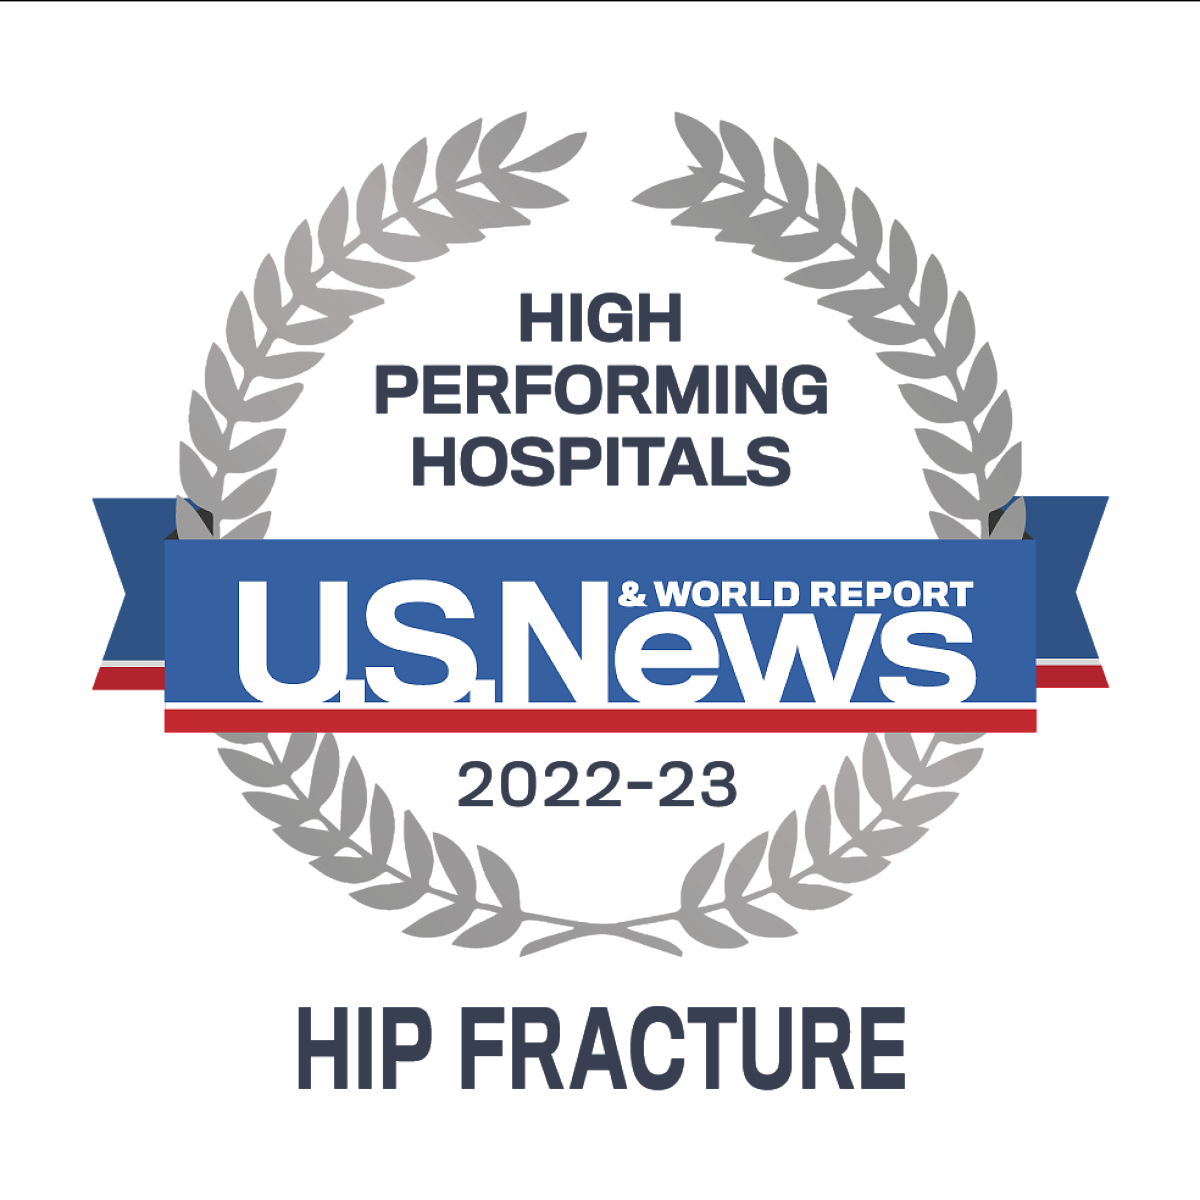 US News & World Report best care for hip fracture 2022-2023